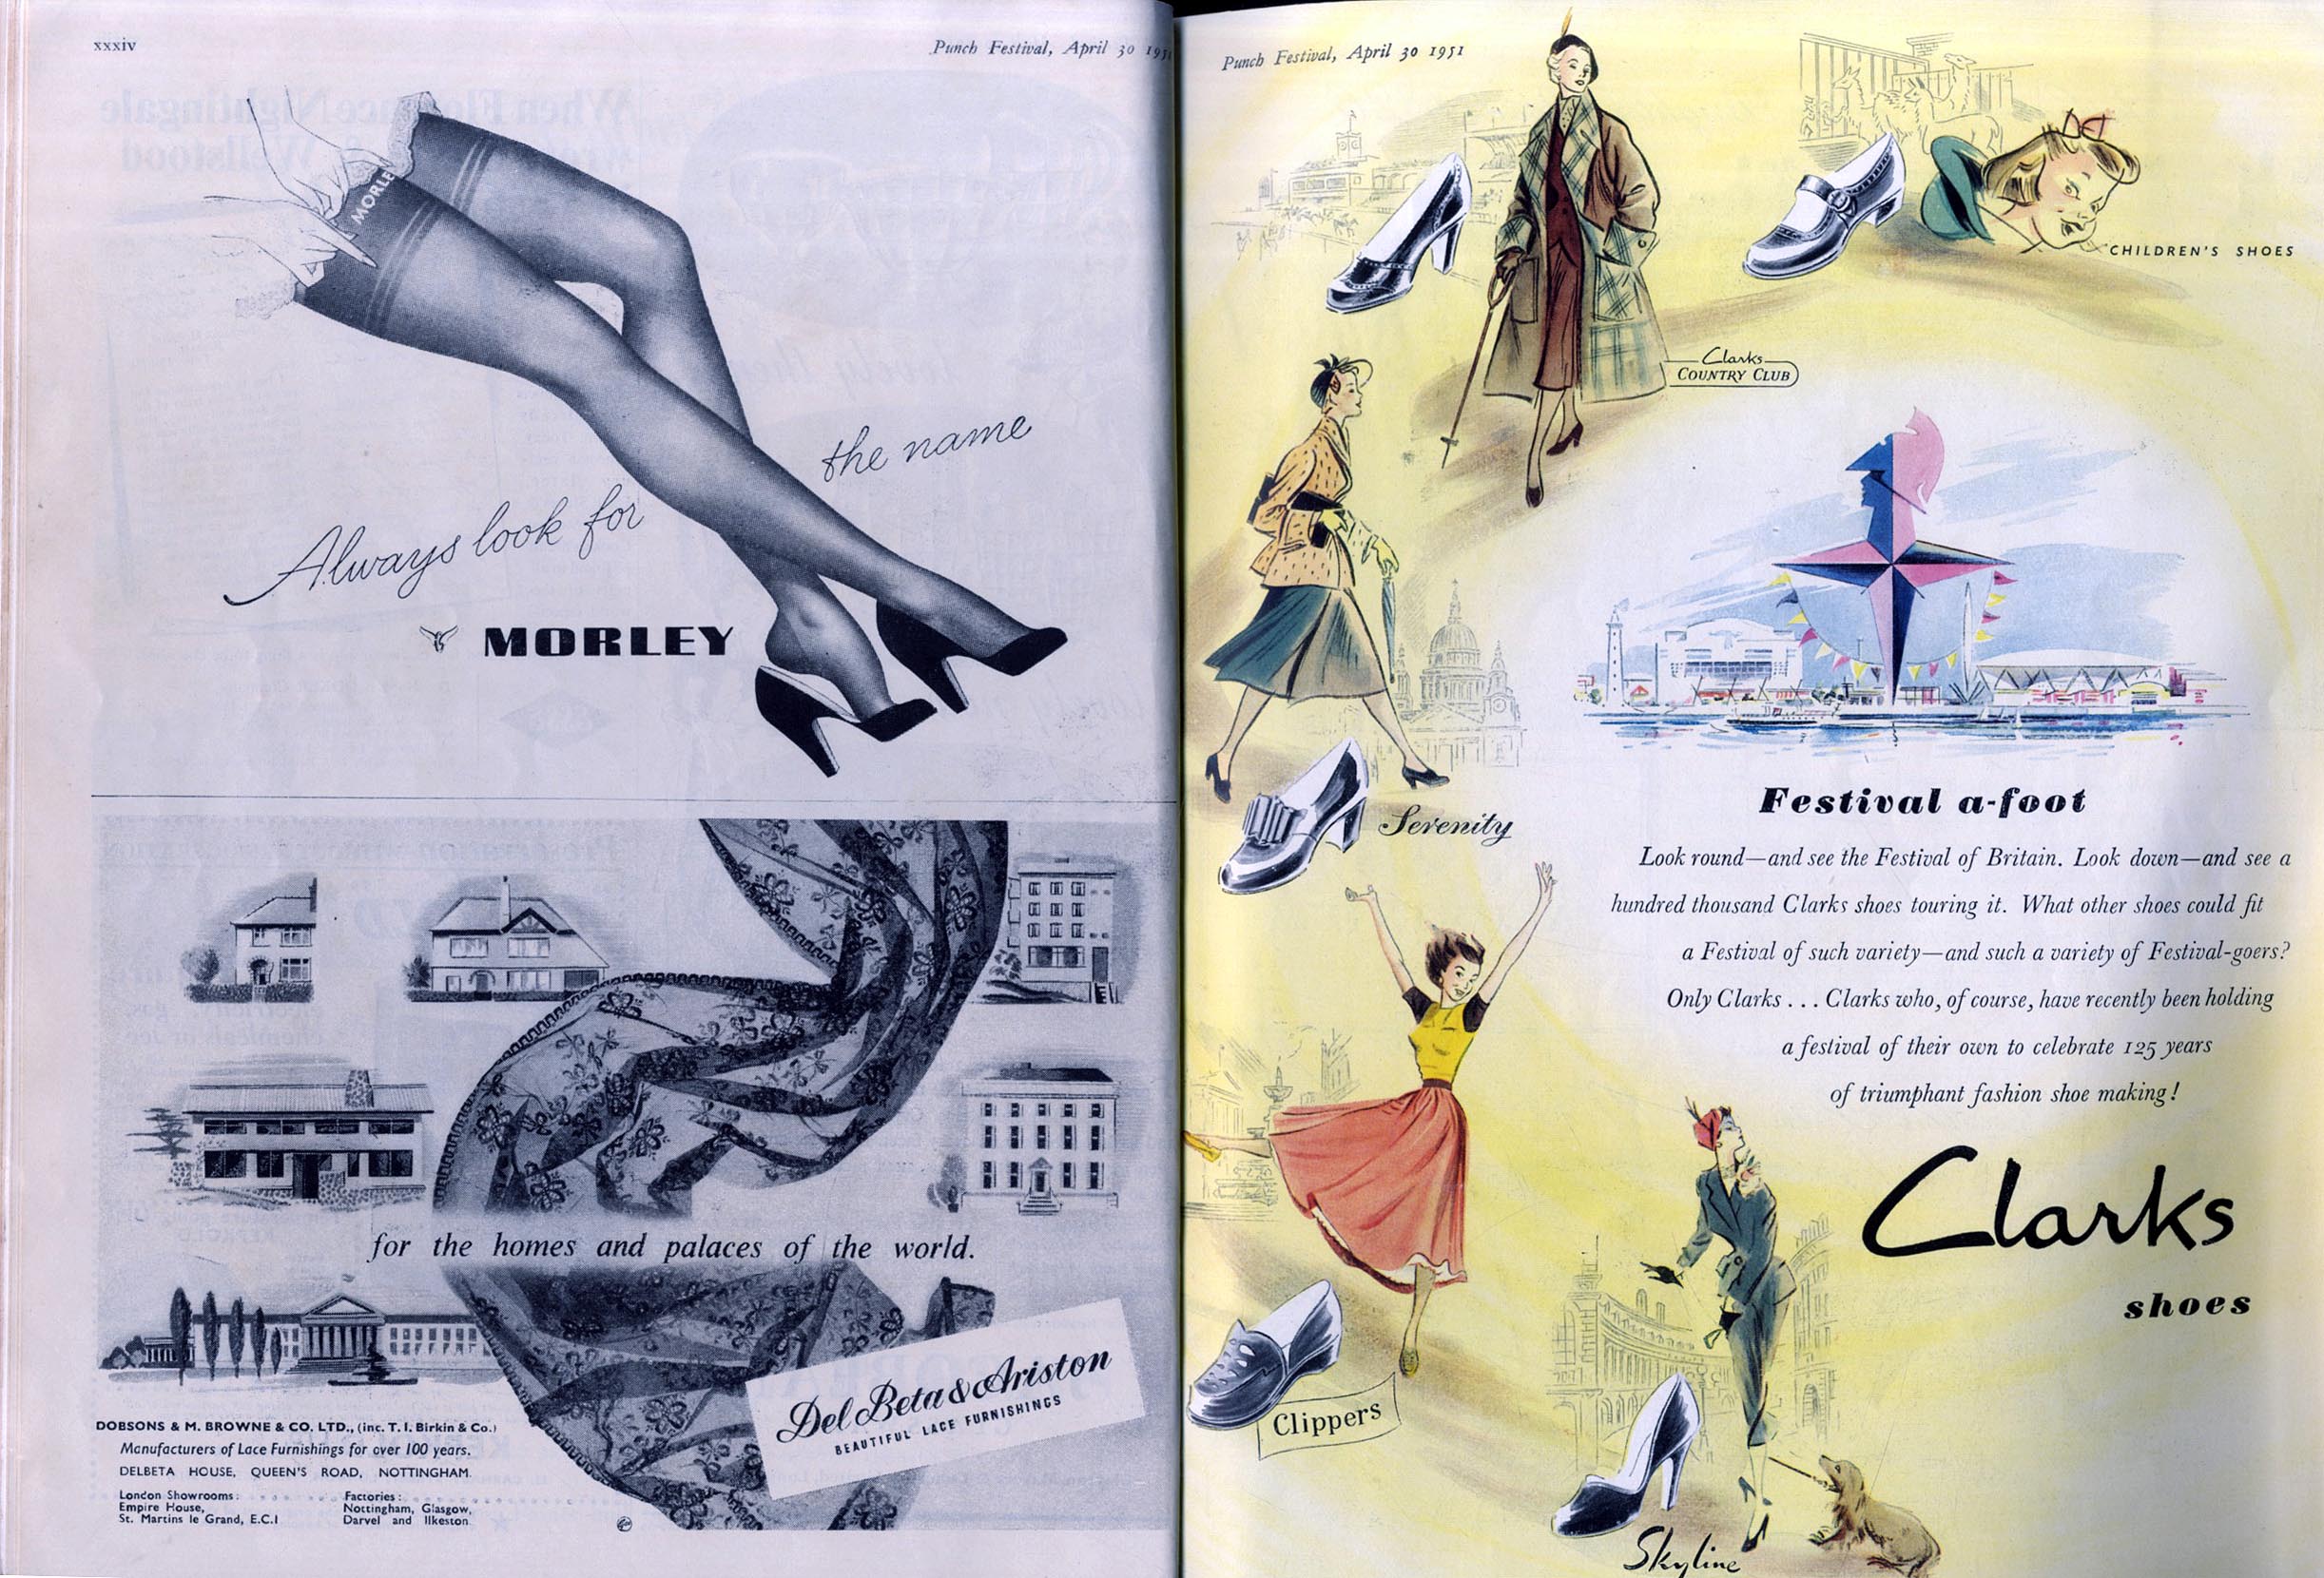 The Festival of Punch 1951, advertisements